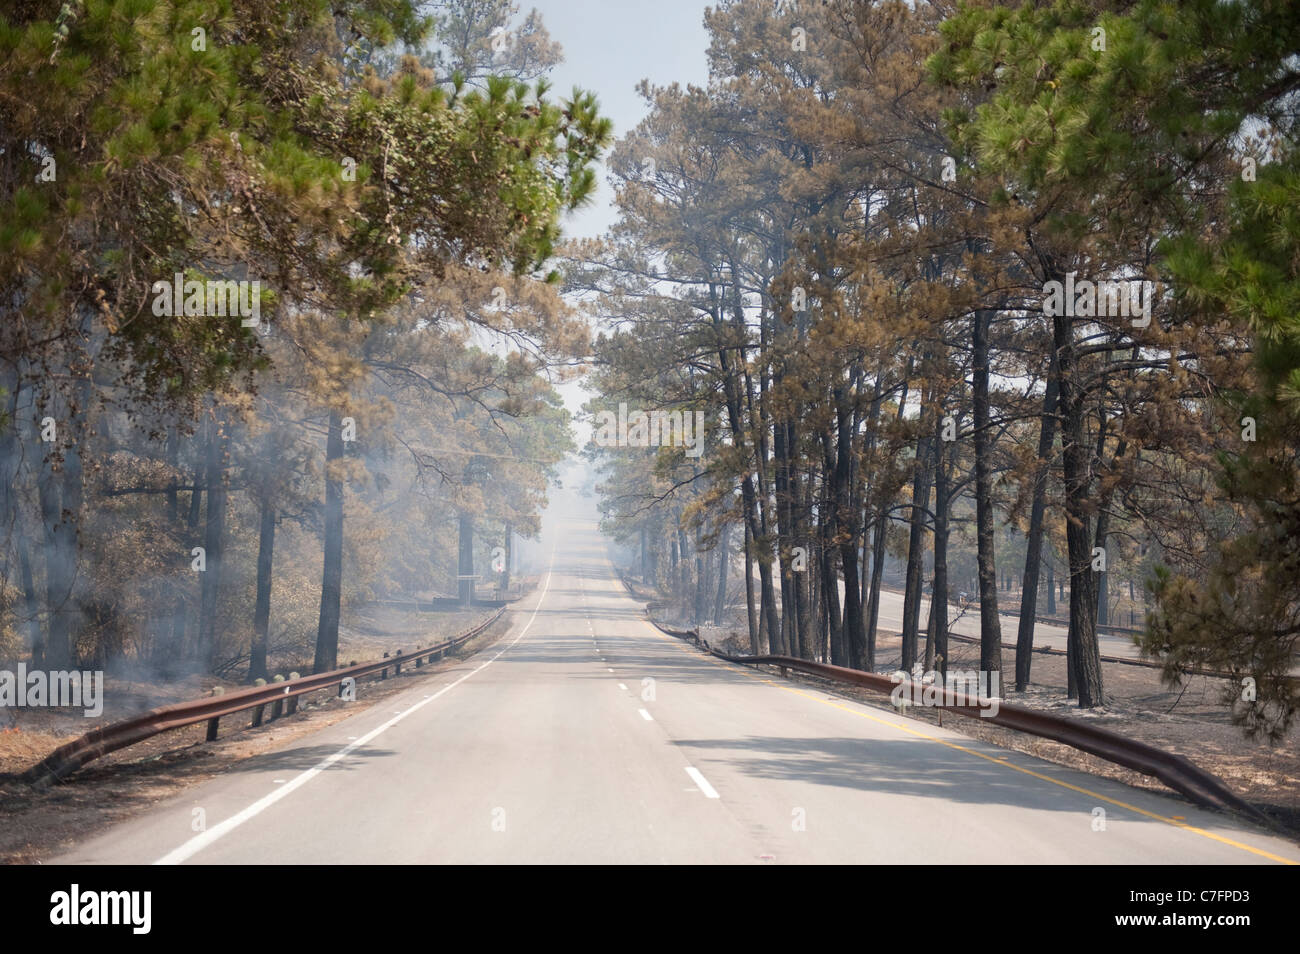 Smoke from a nearby wildfire wafts through pine forest in rural area of Bastrop, Texas, 30 miles east of Austin. Stock Photo